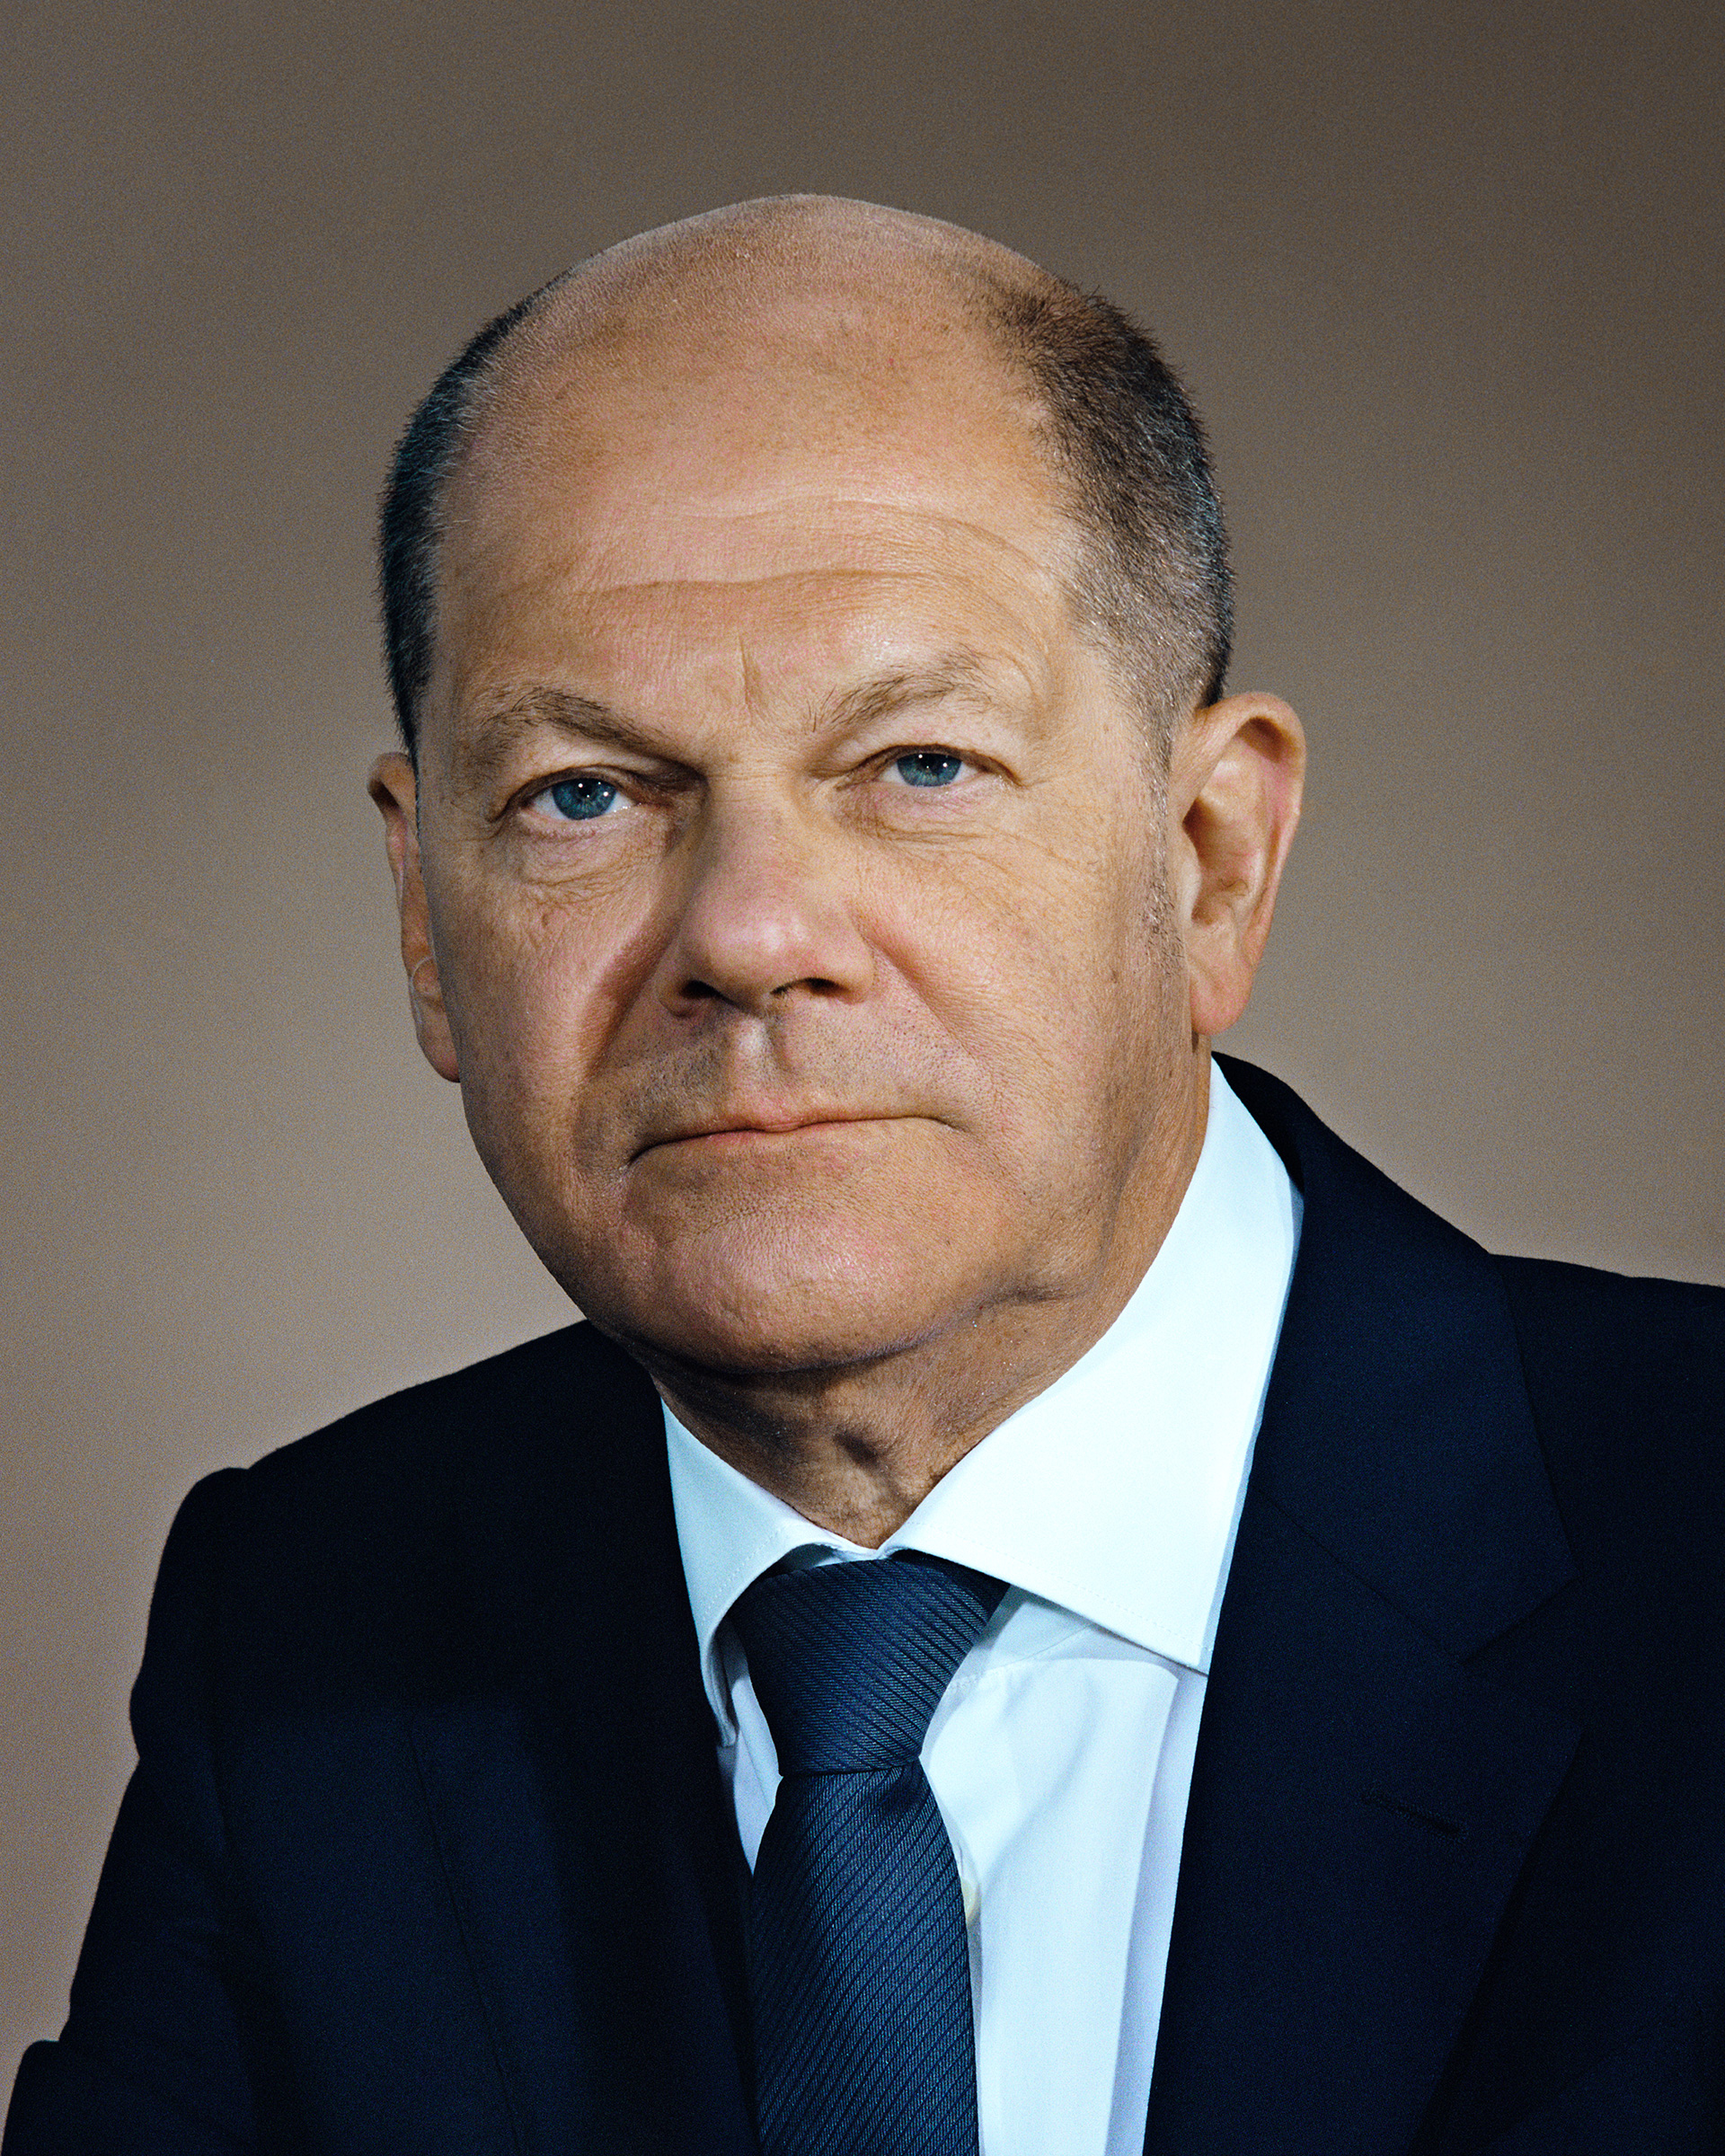 German Chancellor Olaf Scholz photographed at the Chancellery in Berlin, April 22 (Mark Peckmezian for TIME)